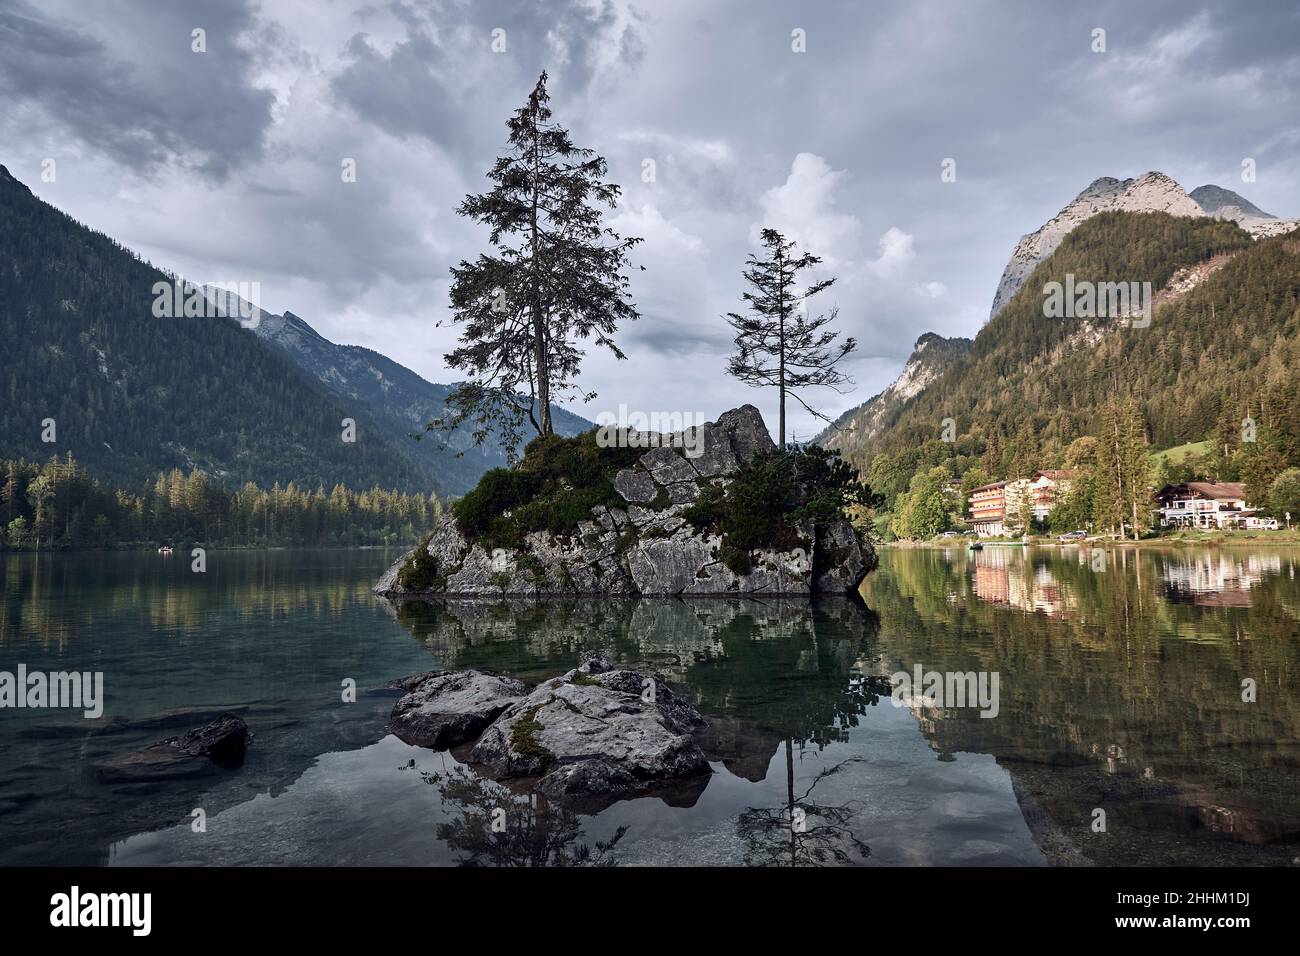 Idyllic landscape with trees growing on a rock in Lake Hintersee, Ramsau, Germany Stock Photo